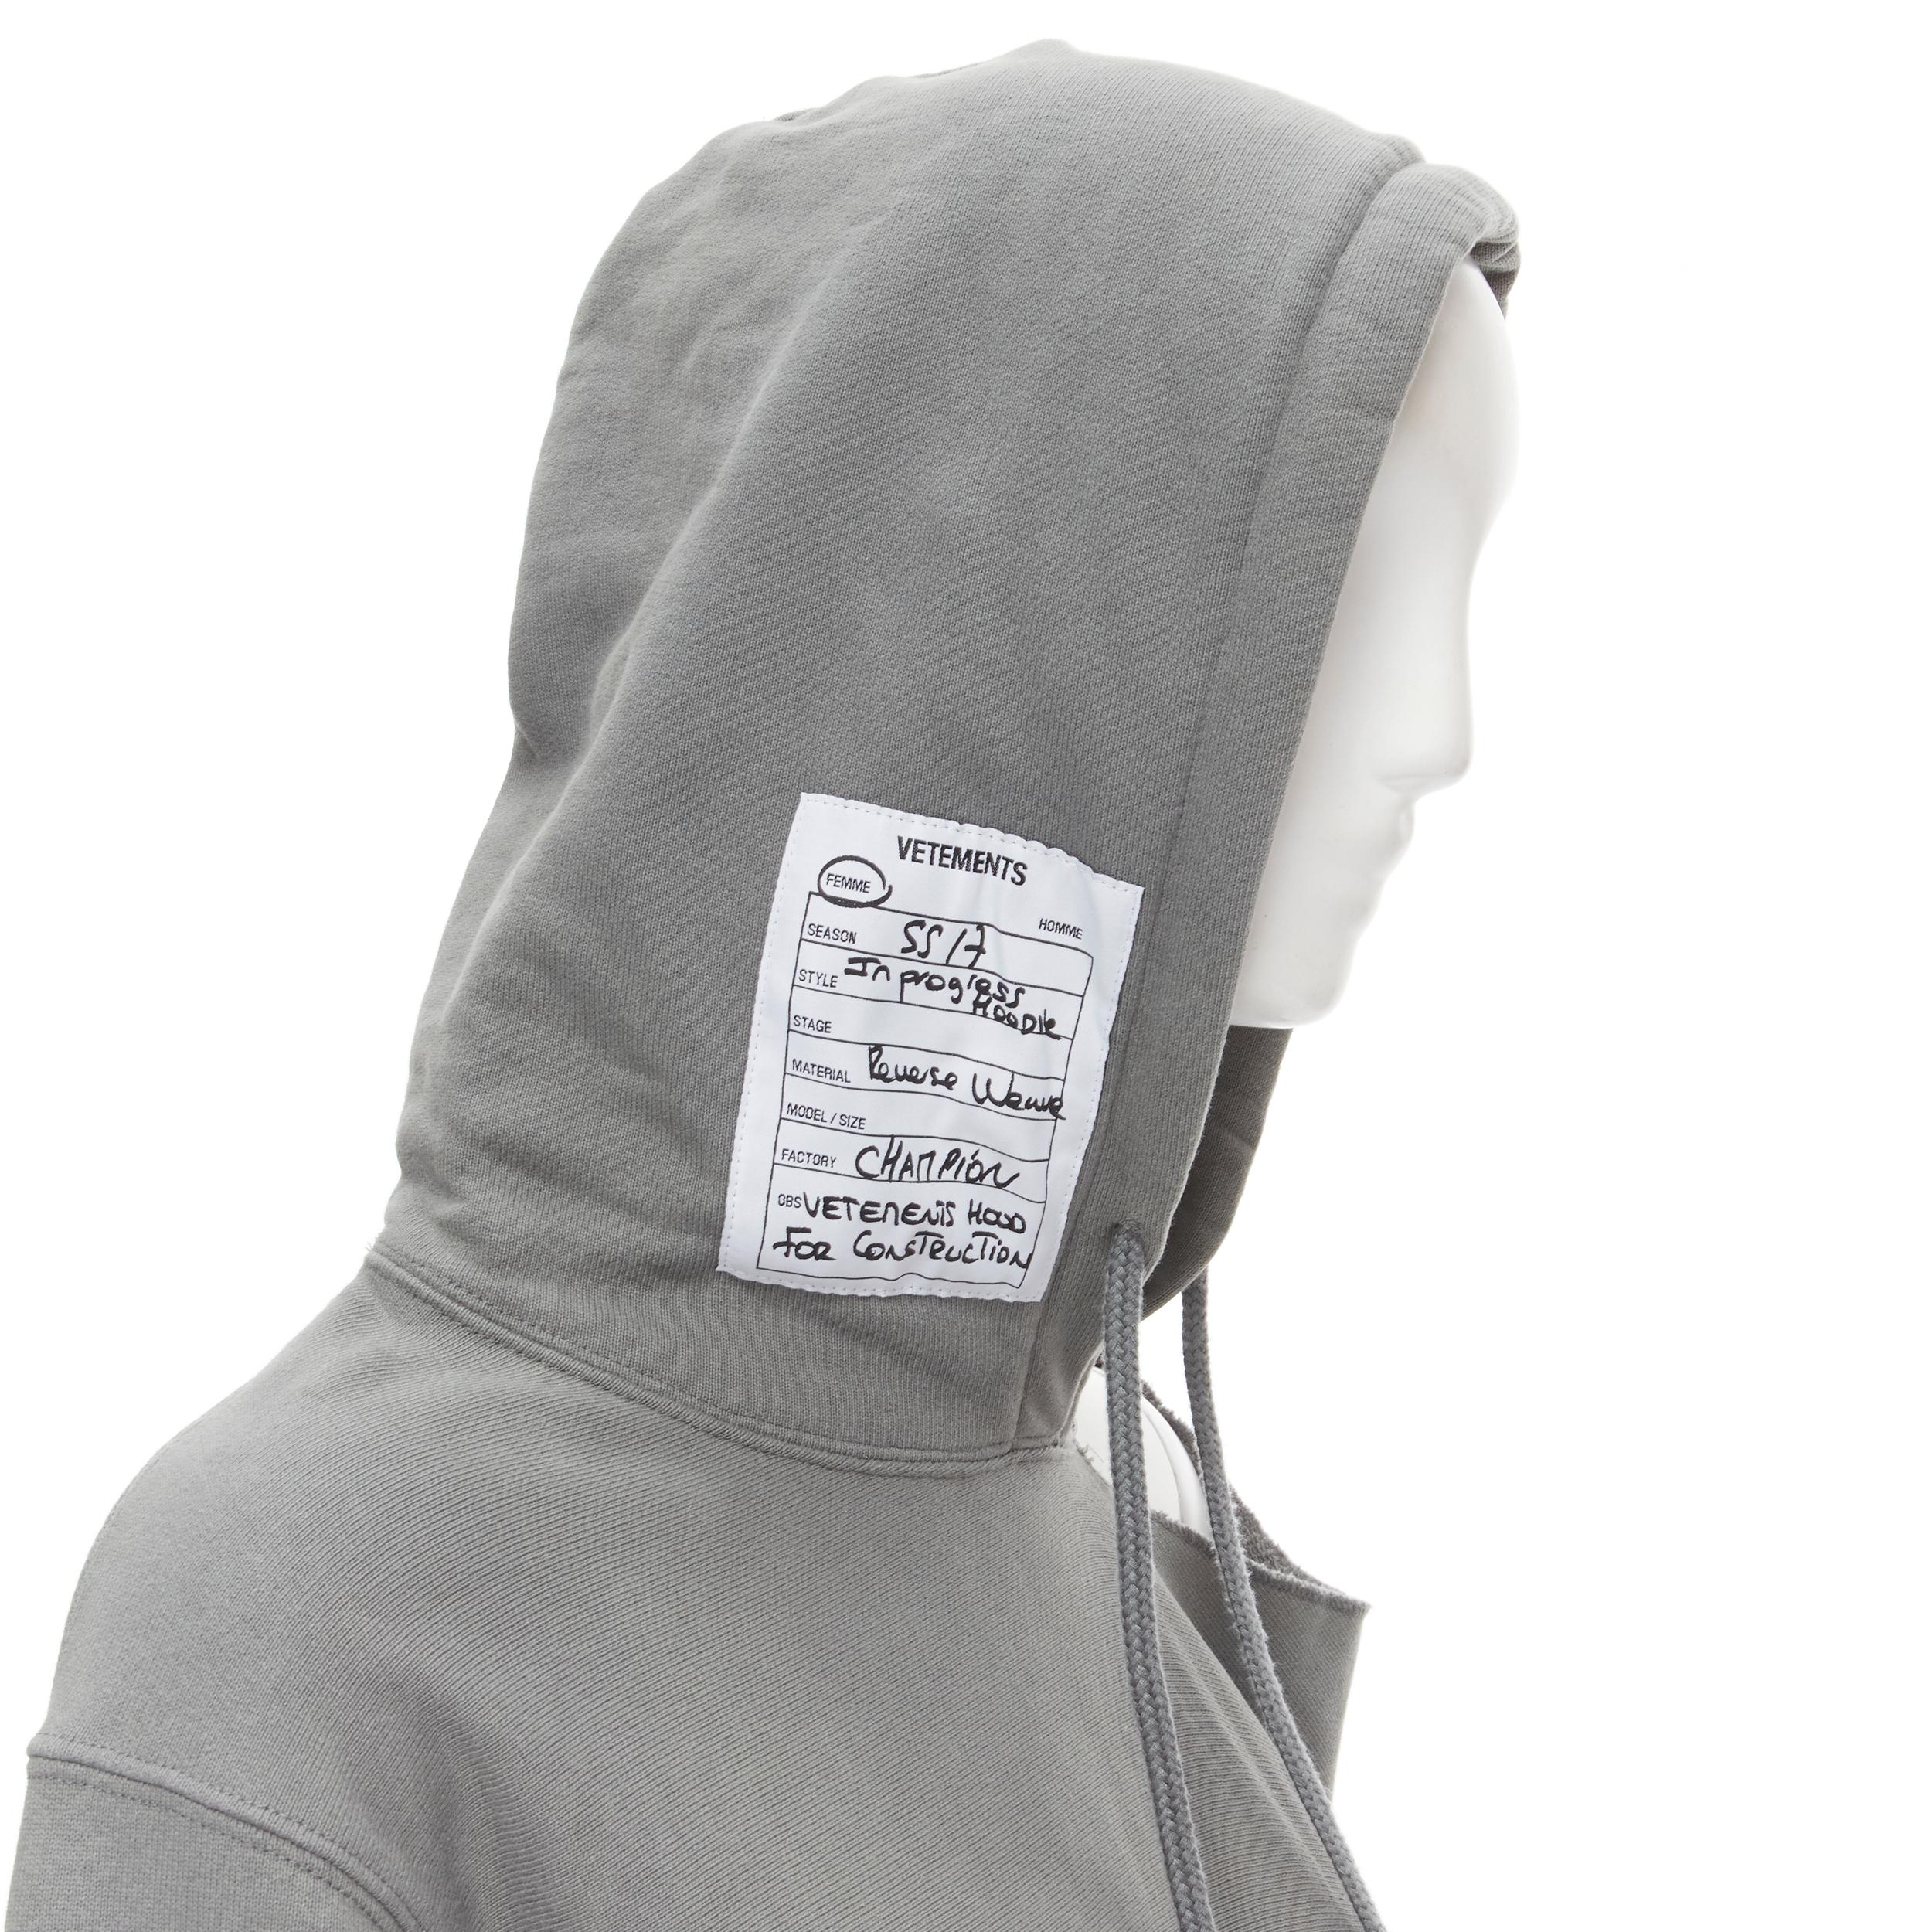 VETEMENTS Champion 2017 Demna Reverse Weave grey cotton hole shoulder hoodie S 
Reference: MELK/A00028 
Brand: Vetements 
Designer: Demna 
Collection: 2017 
Material: Cotton 
Color: Grey 
Pattern: Solid 
Extra Detail: Label patch design on hood.